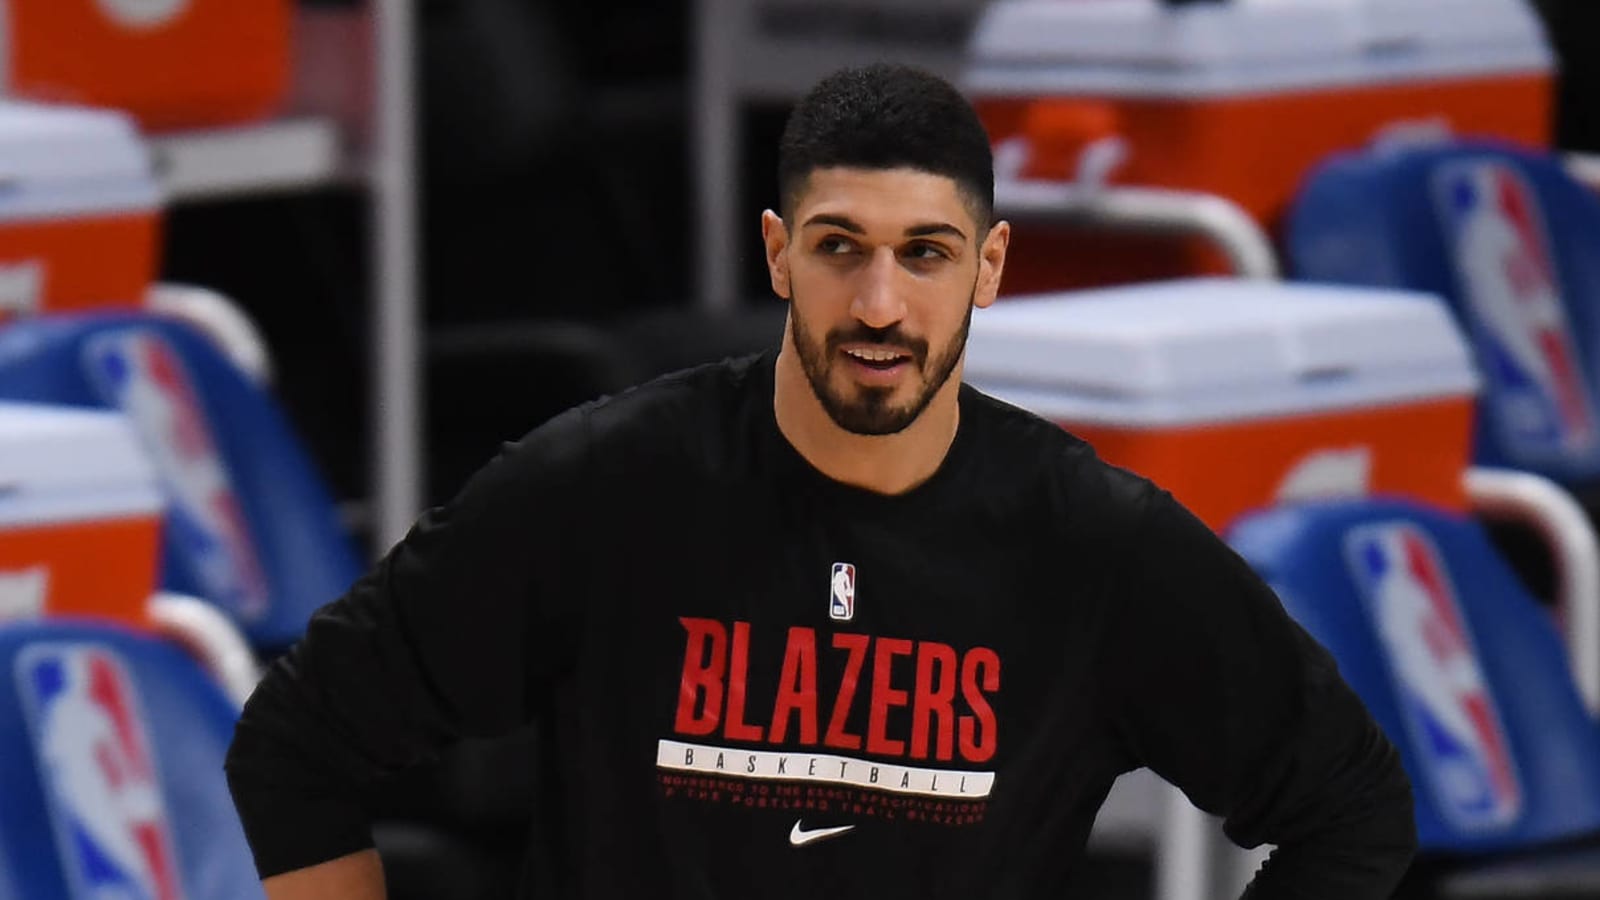 Lakers bench distracts Enes Kanter during FT attempt